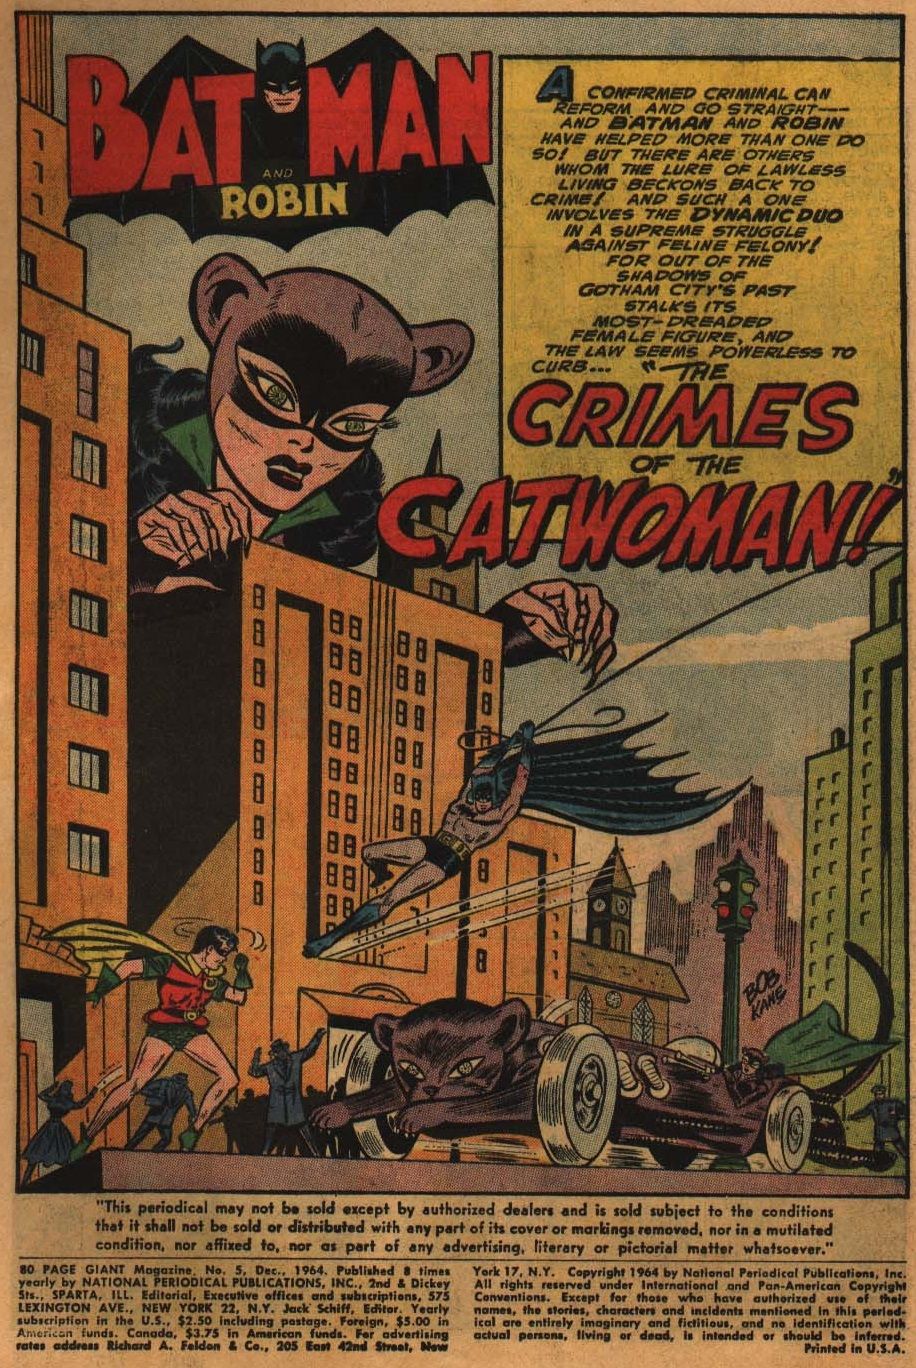 The Catwoman story in 80 Page Giant #5